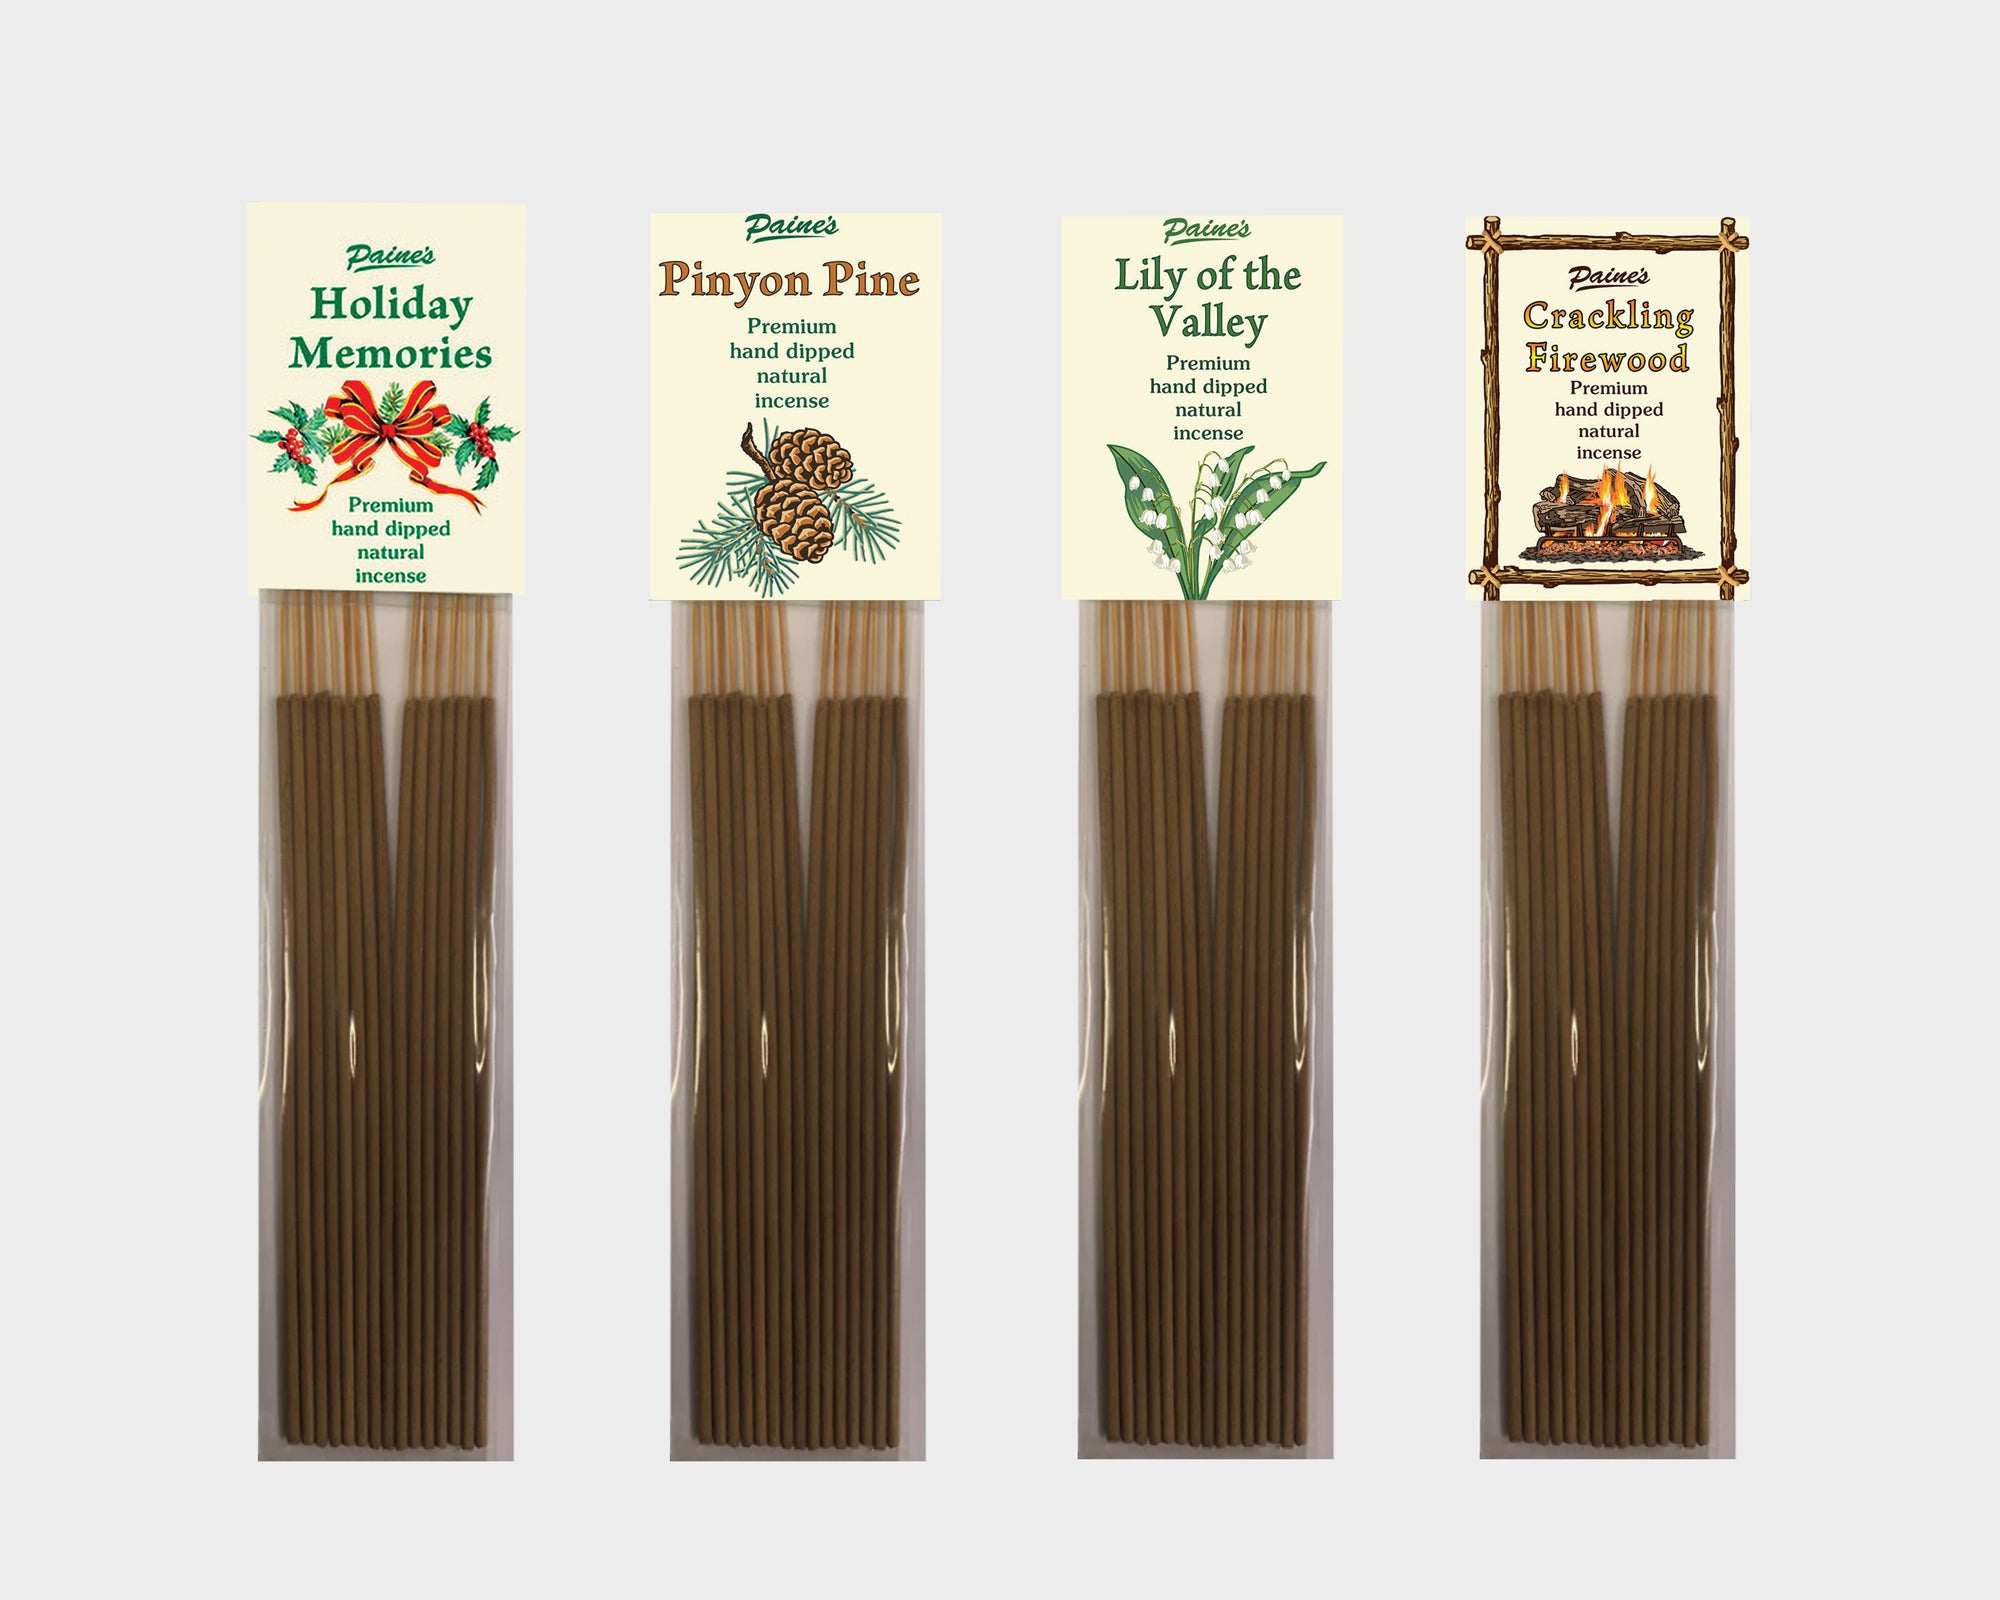 Paine's Holiday Memories Incense - 20 Sticks